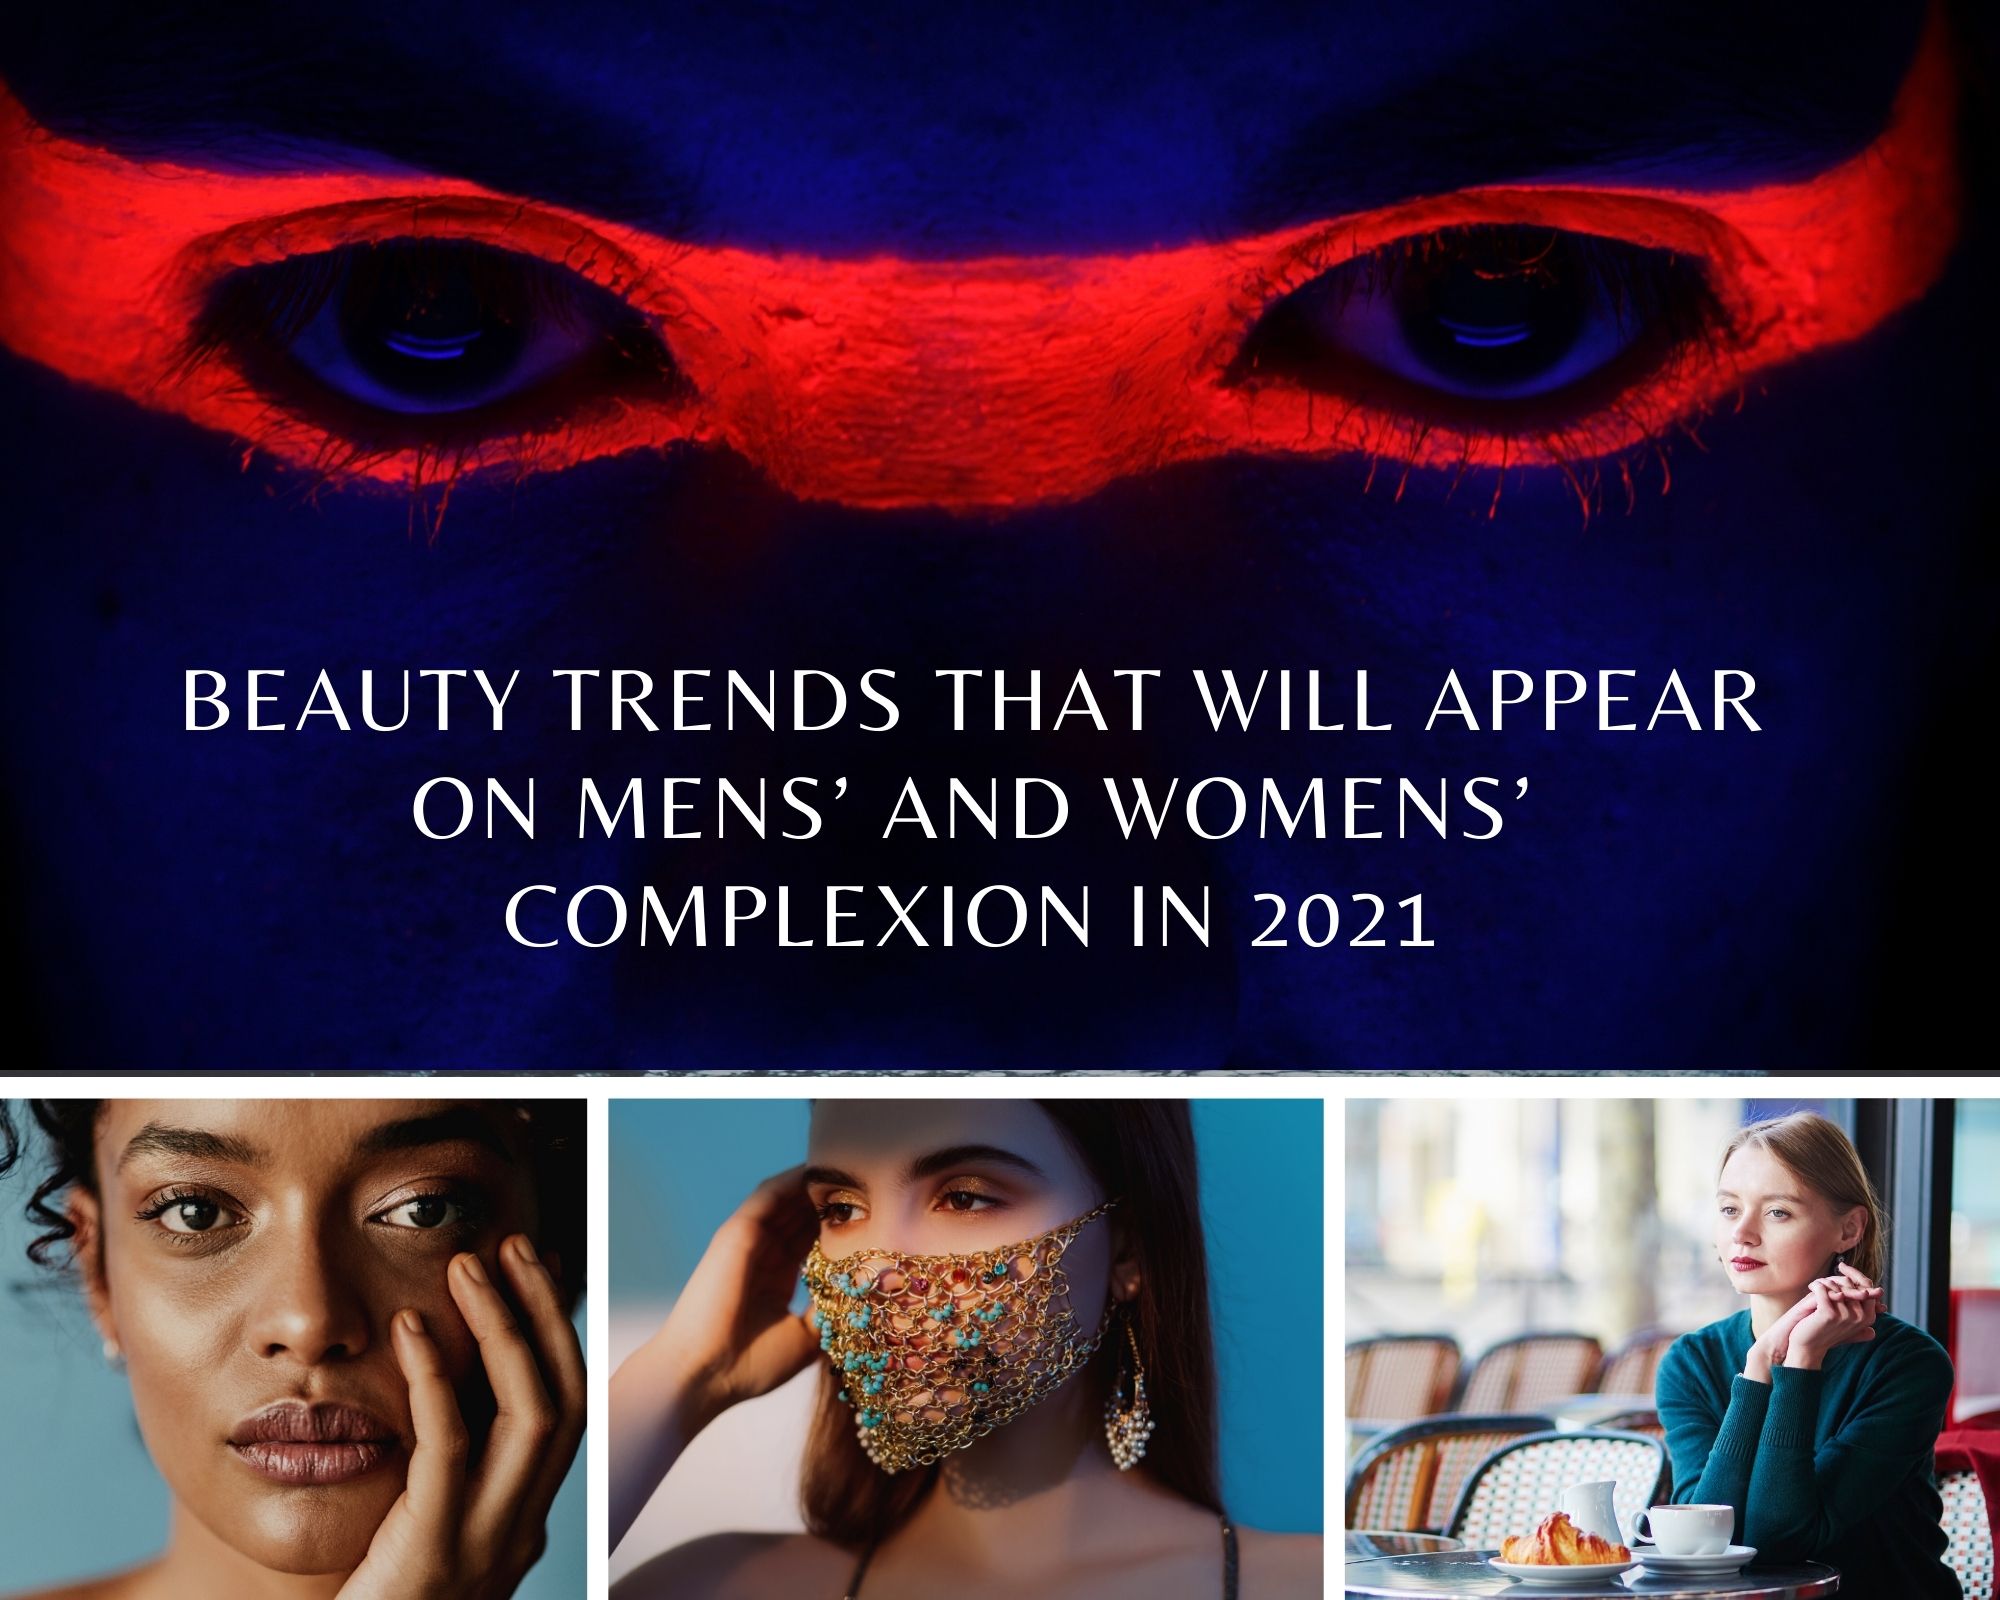 Beauty trends that will appear on mens’ and womens’ complexion in 2021